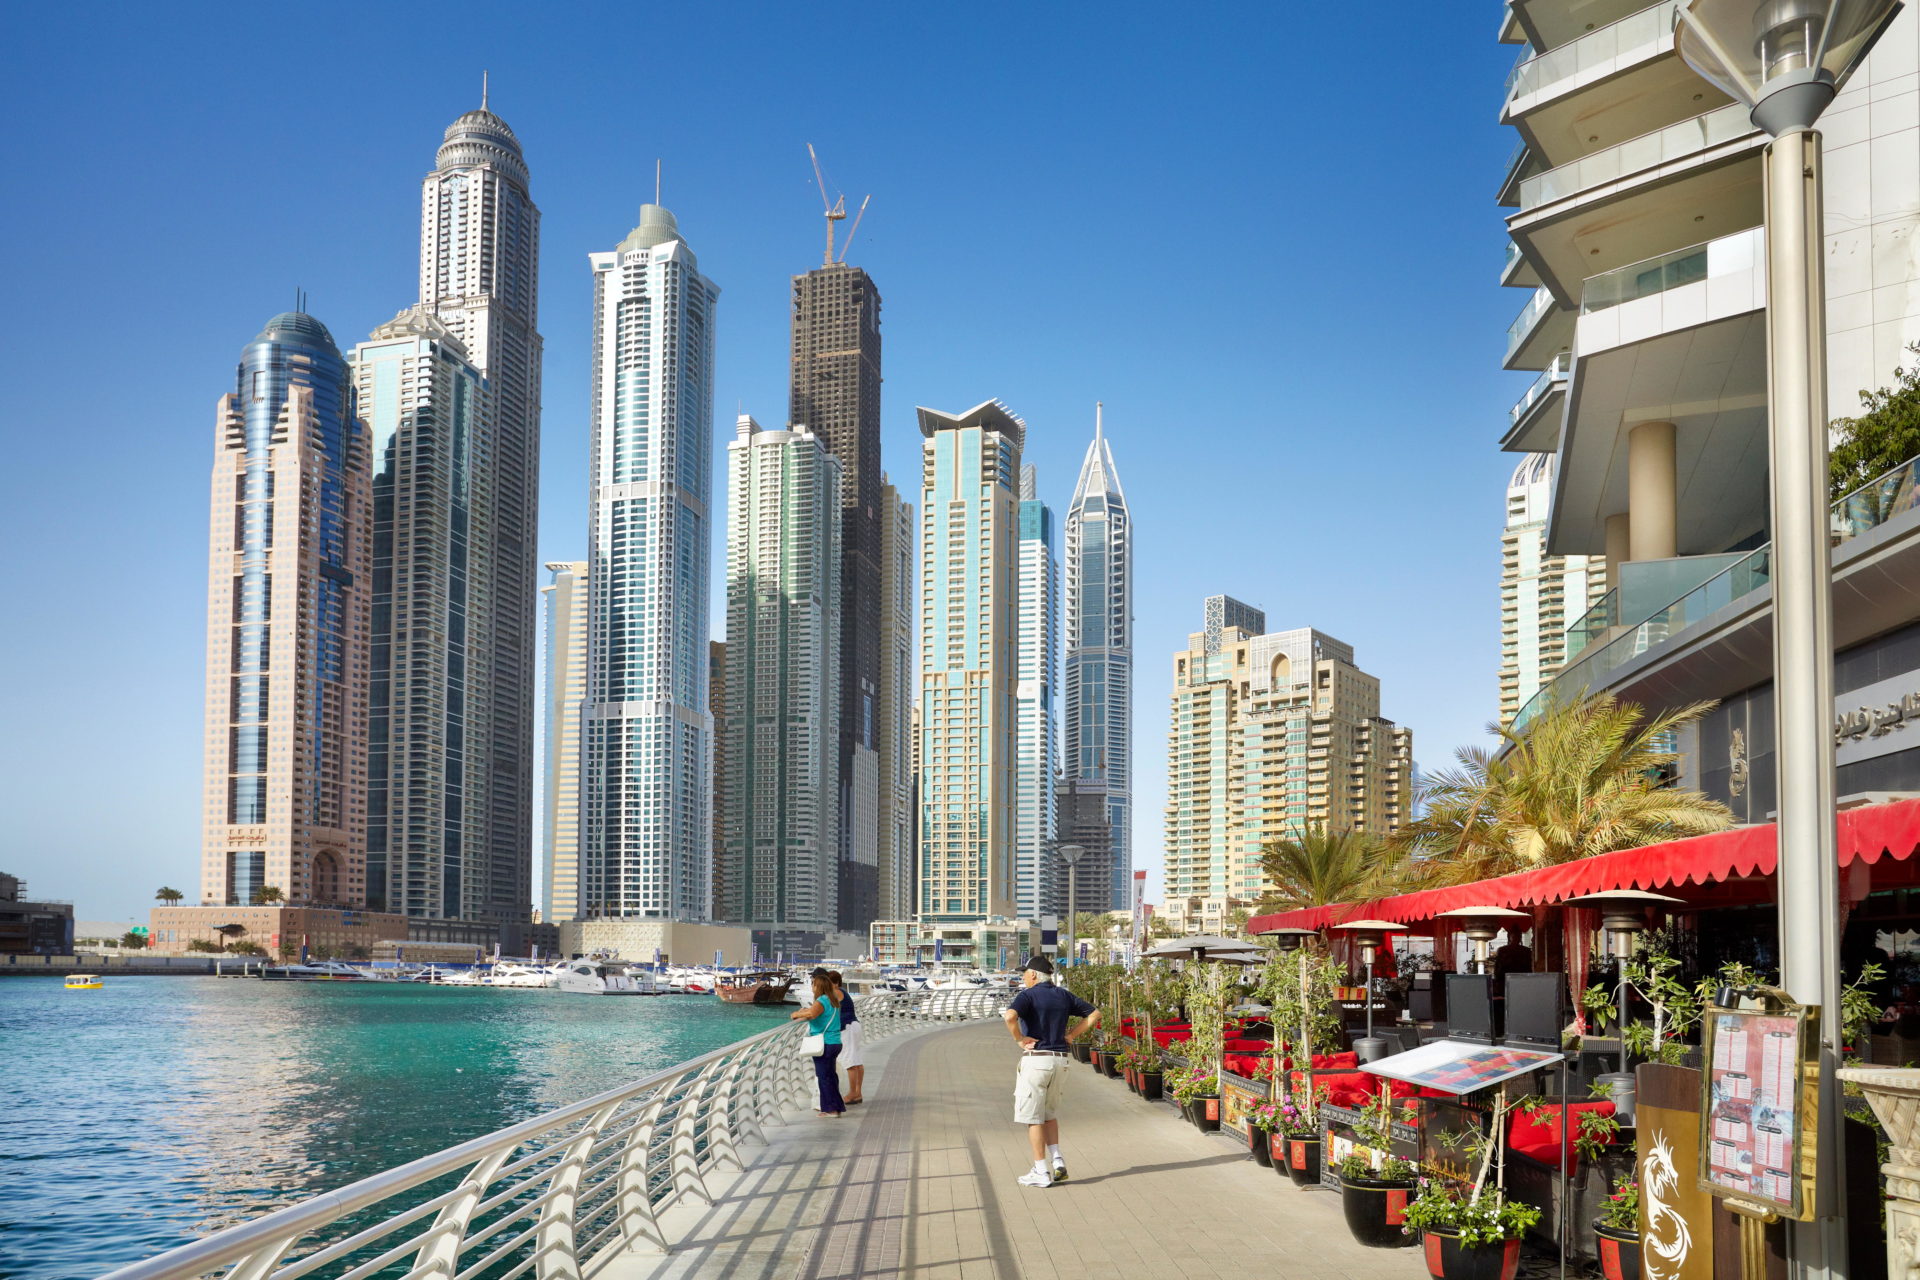 The marina in Dubai, United Arab Emirates is seen in March 2012.